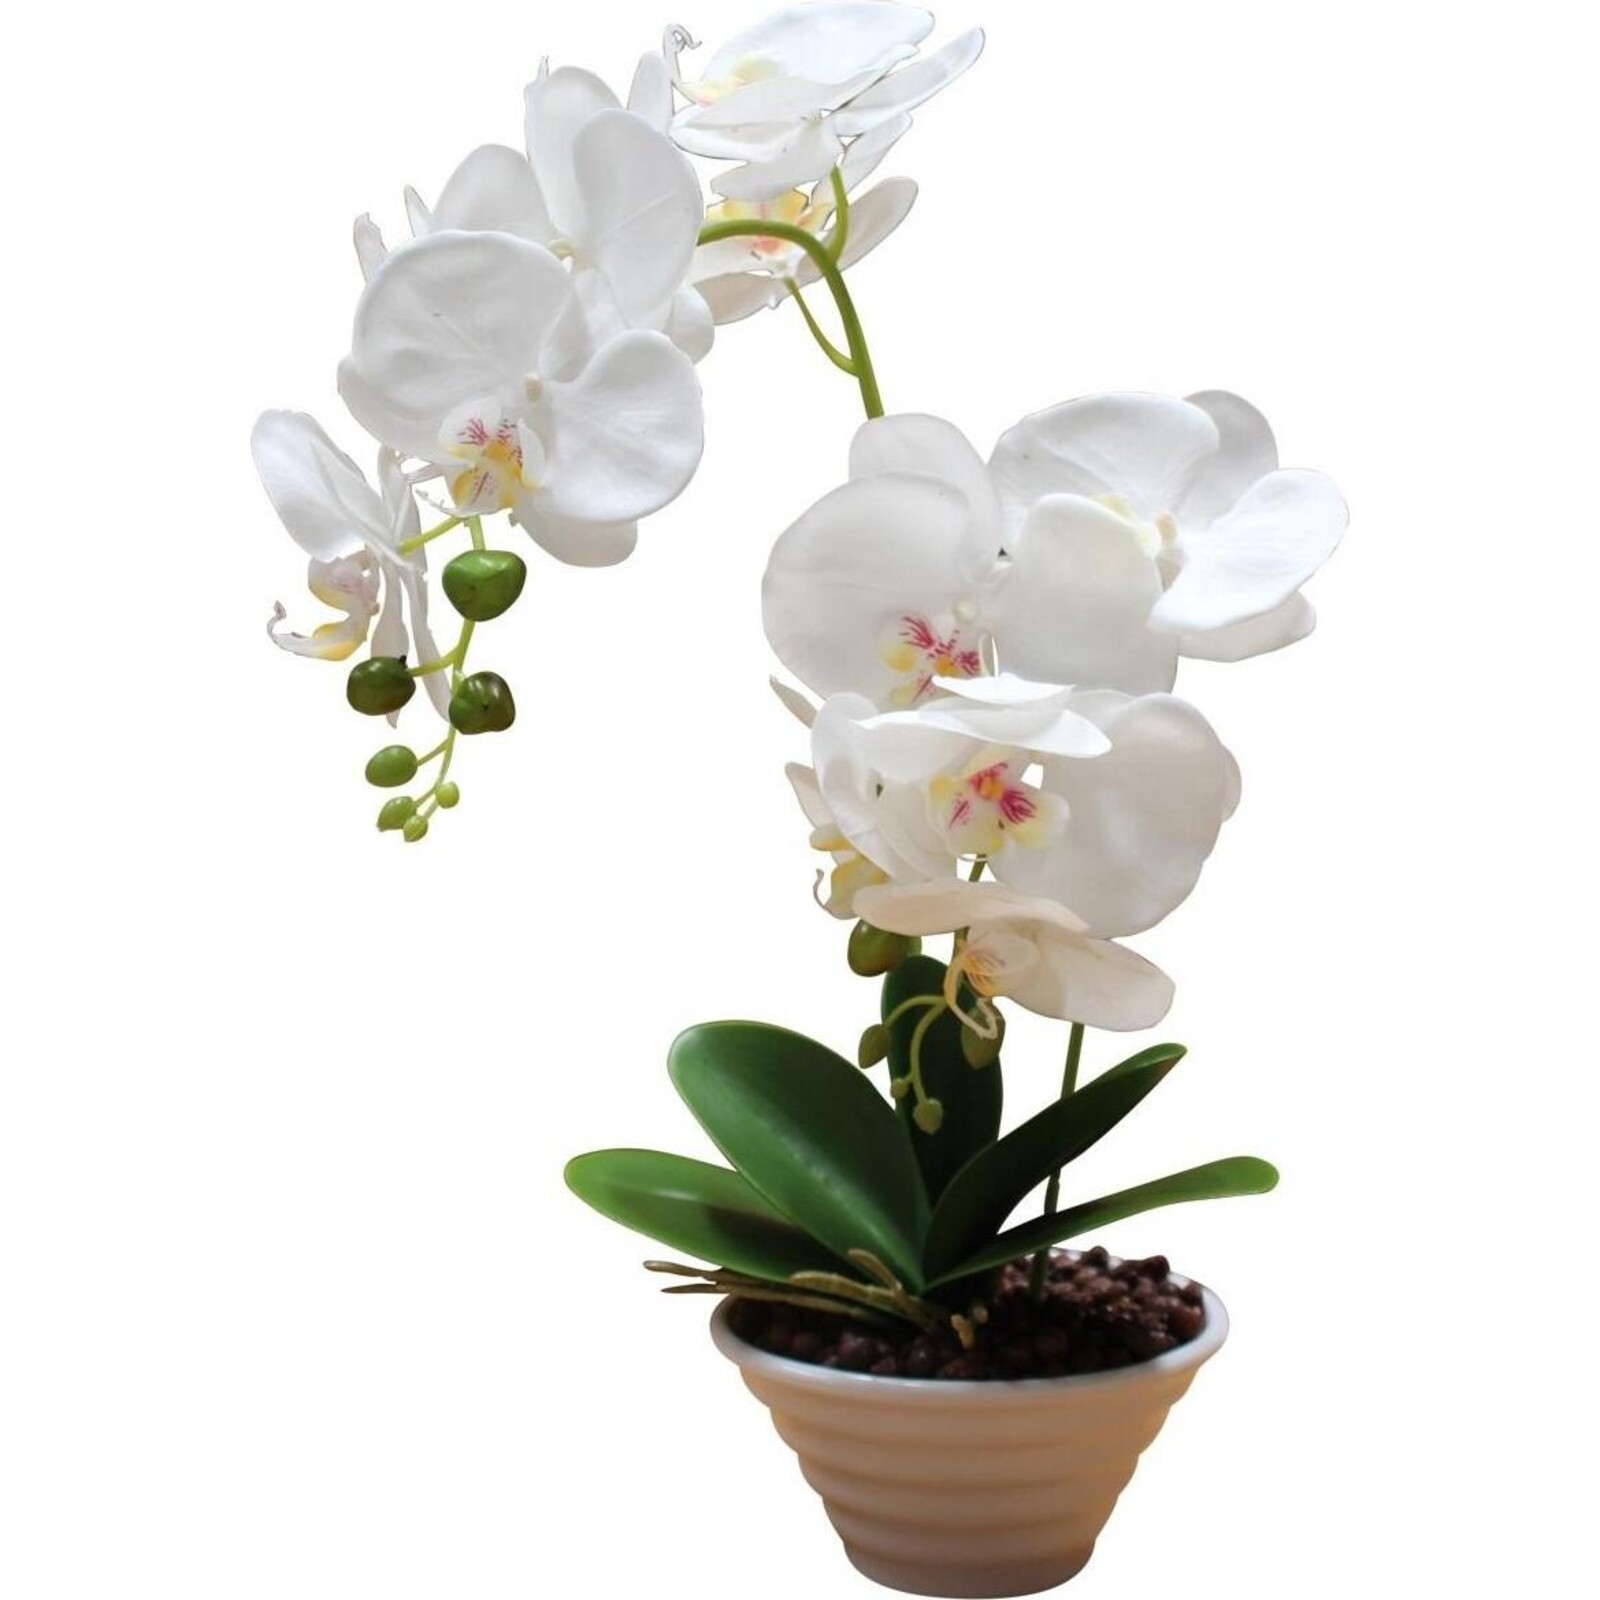 Imitation Orchid Tall White